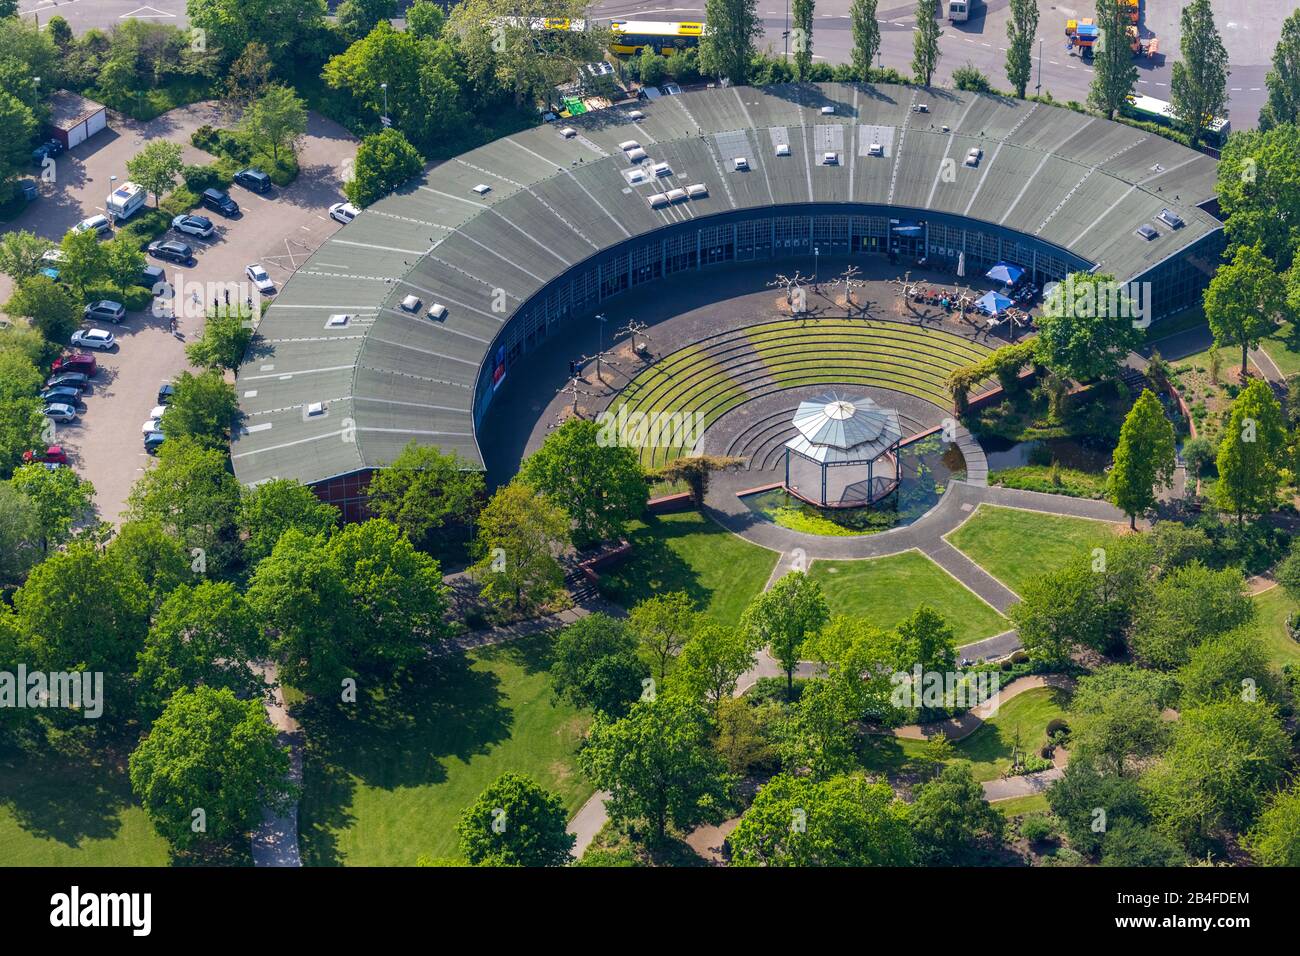 Aerial view of the Ringlokschuppen Mülheim an der Ruhr, cultural centre in an old railway depot with live artists, youth theatre and open-air events, in Mülheim an der Ruhr in the Ruhr area in the federal state of North Rhine-Westphalia, Germany. Stock Photo